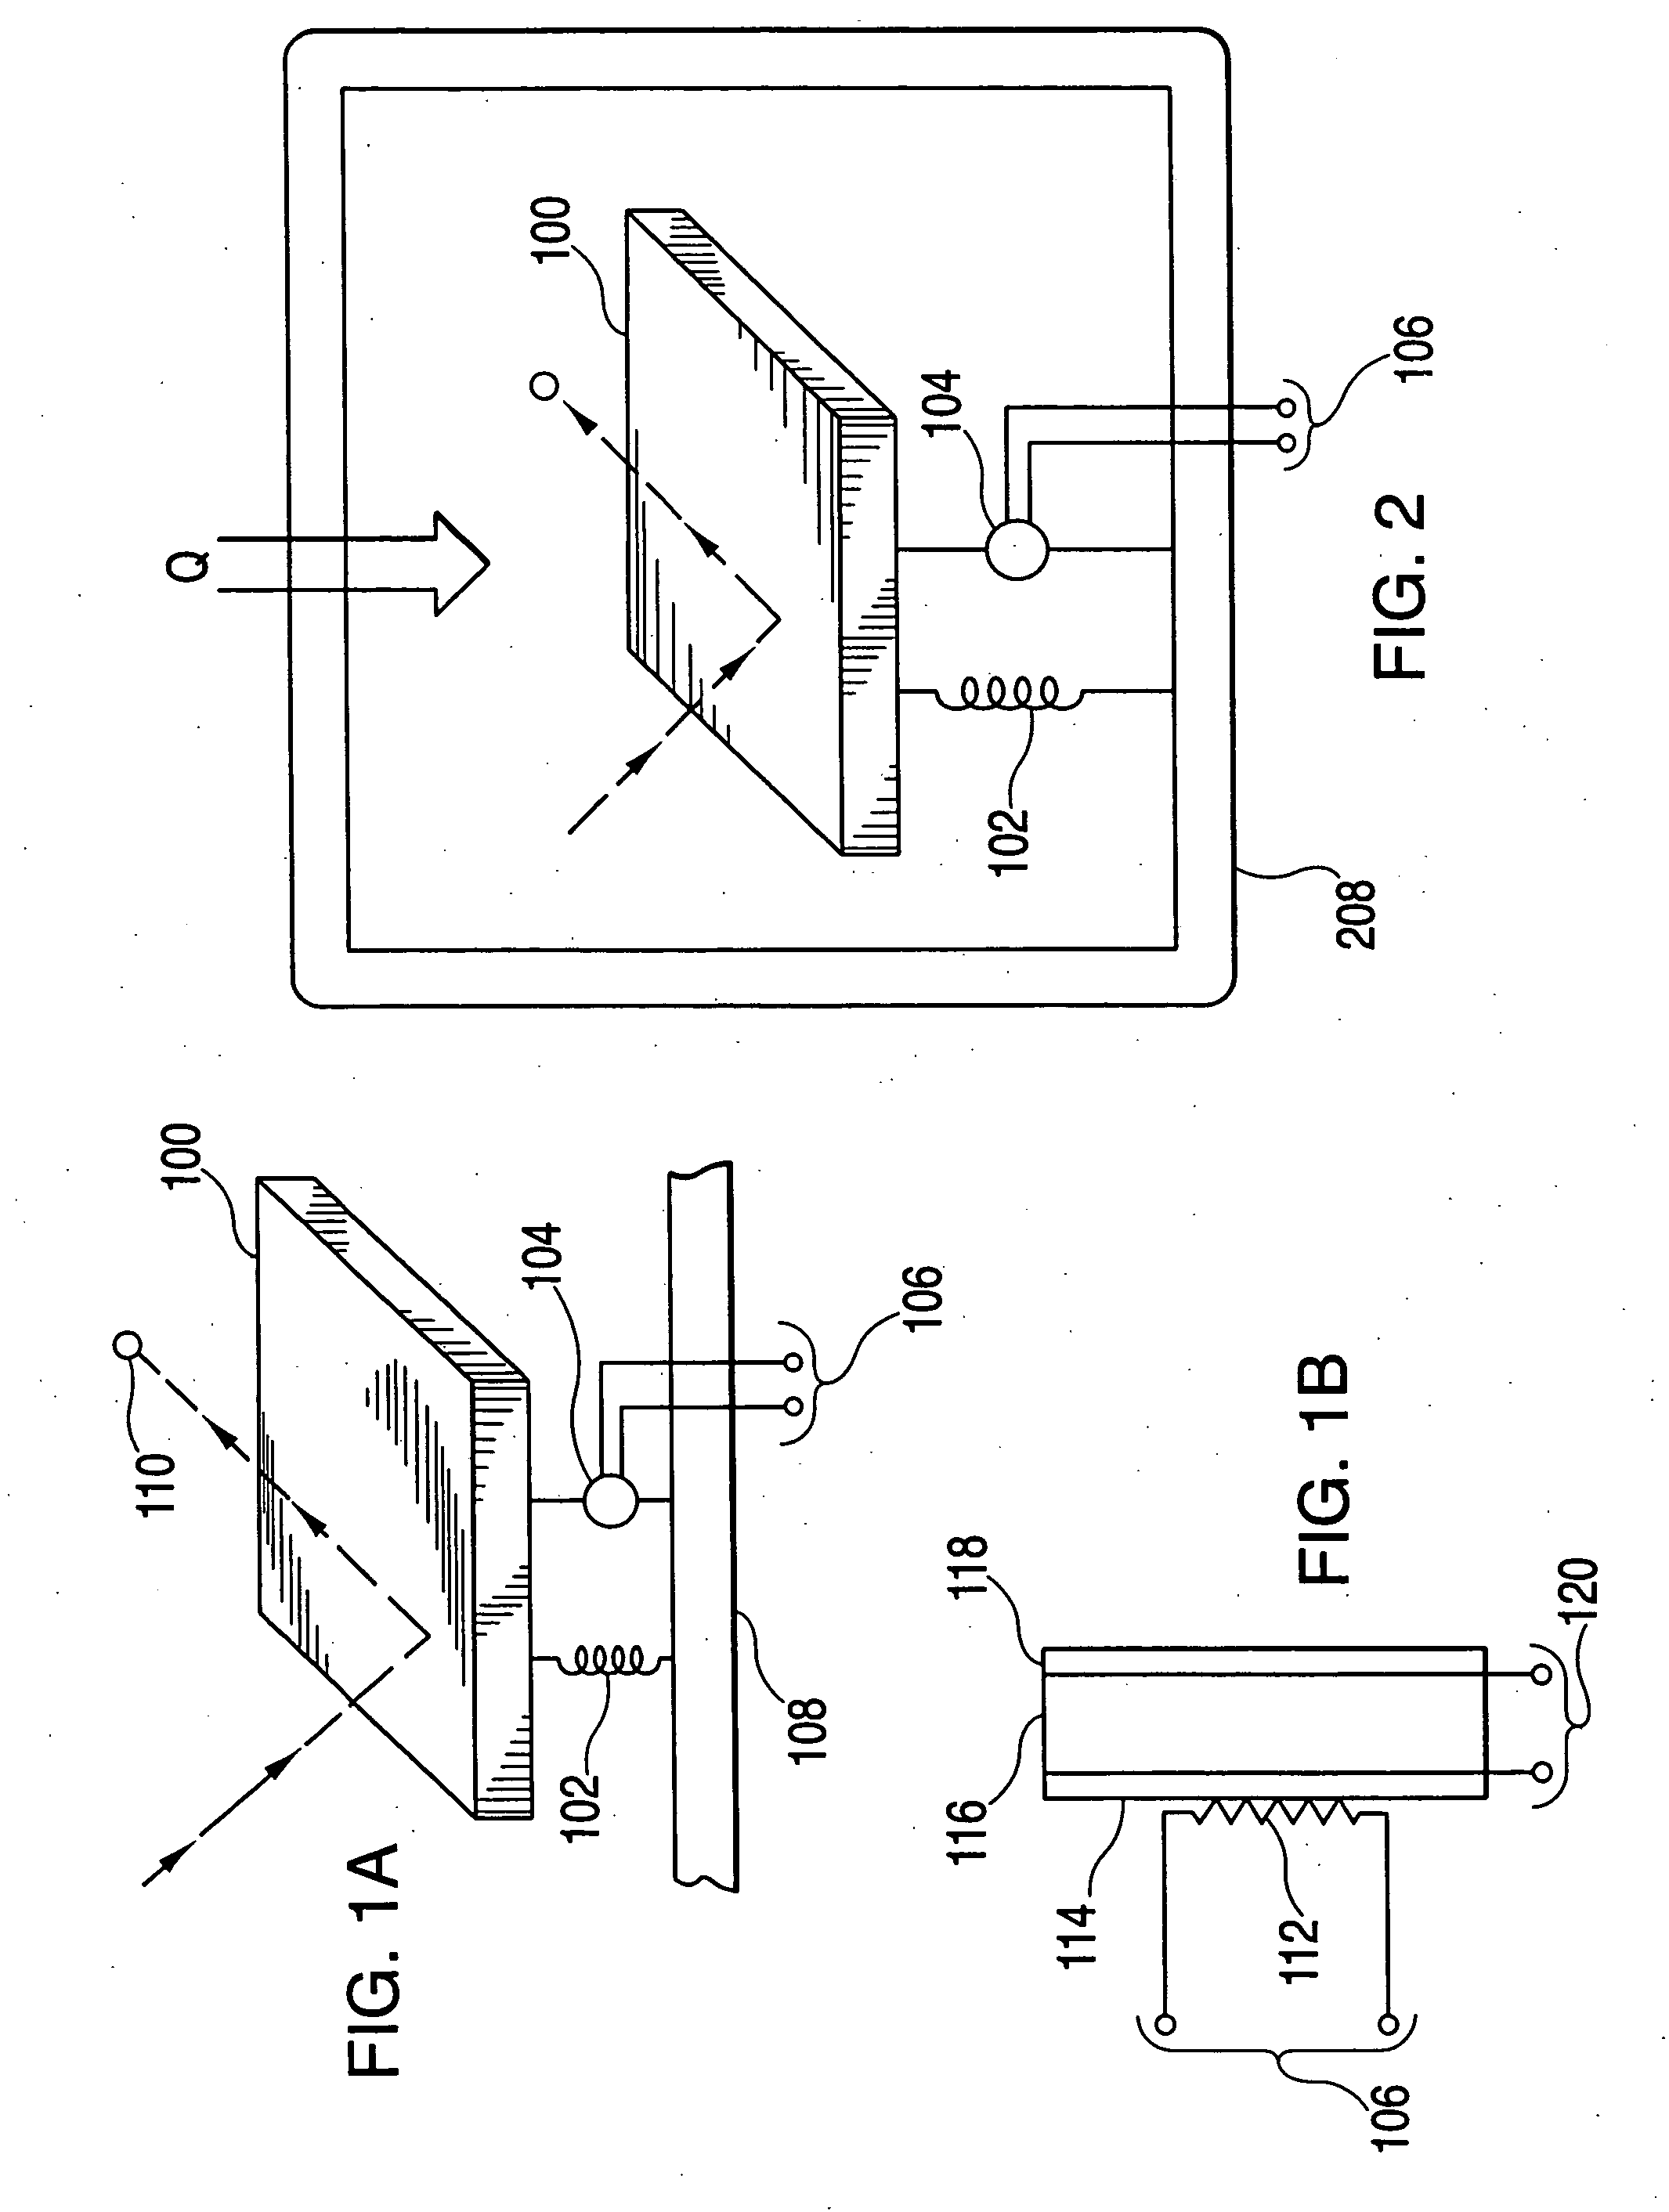 Energy conversion systems utilizing parallel array of automatic switches and generators